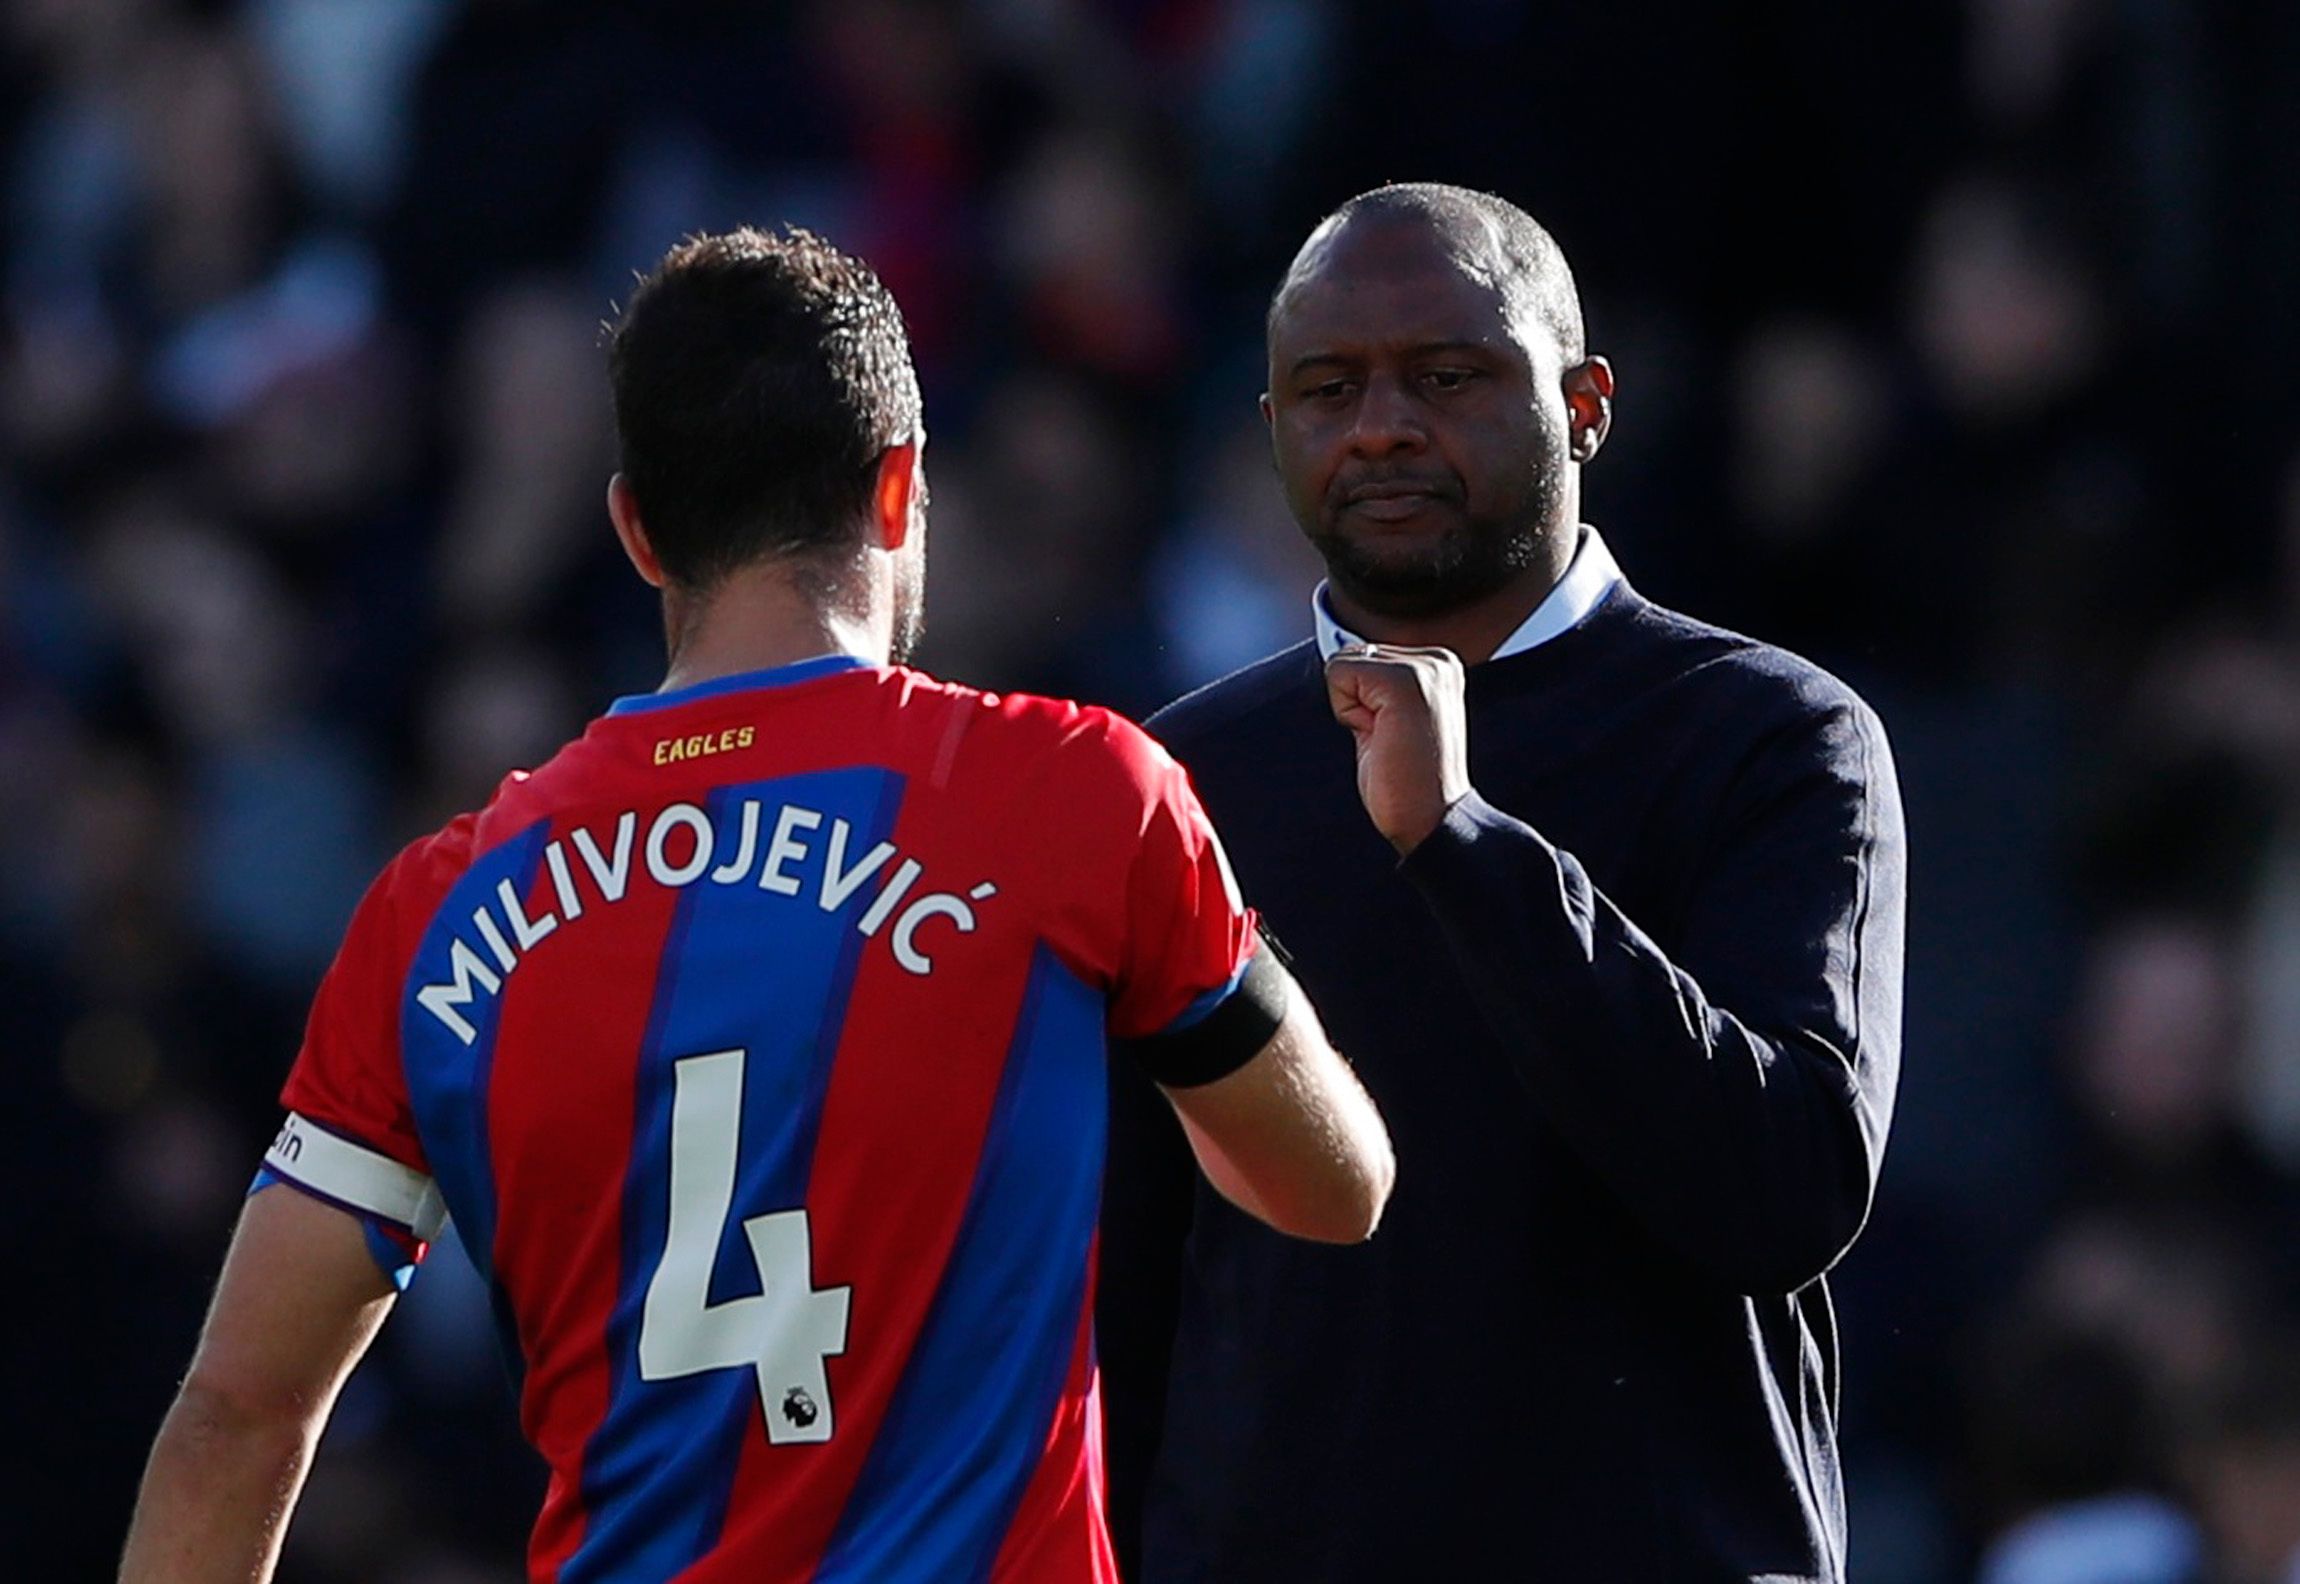 Soccer Football - Premier League - Crystal Palace v Leicester City - Selhurst Park, London, Britain - October 3, 2021 Crystal Palace's Luka Milivojevic shakes hands with  manager Patrick Vieira after the match Action Images via Reuters/Andrew Couldridge EDITORIAL USE ONLY. No use with unauthorized audio, video, data, fixture lists, club/league logos or 'live' services. Online in-match use limited to 75 images, no video emulation. No use in betting, games or single club /league/player publication